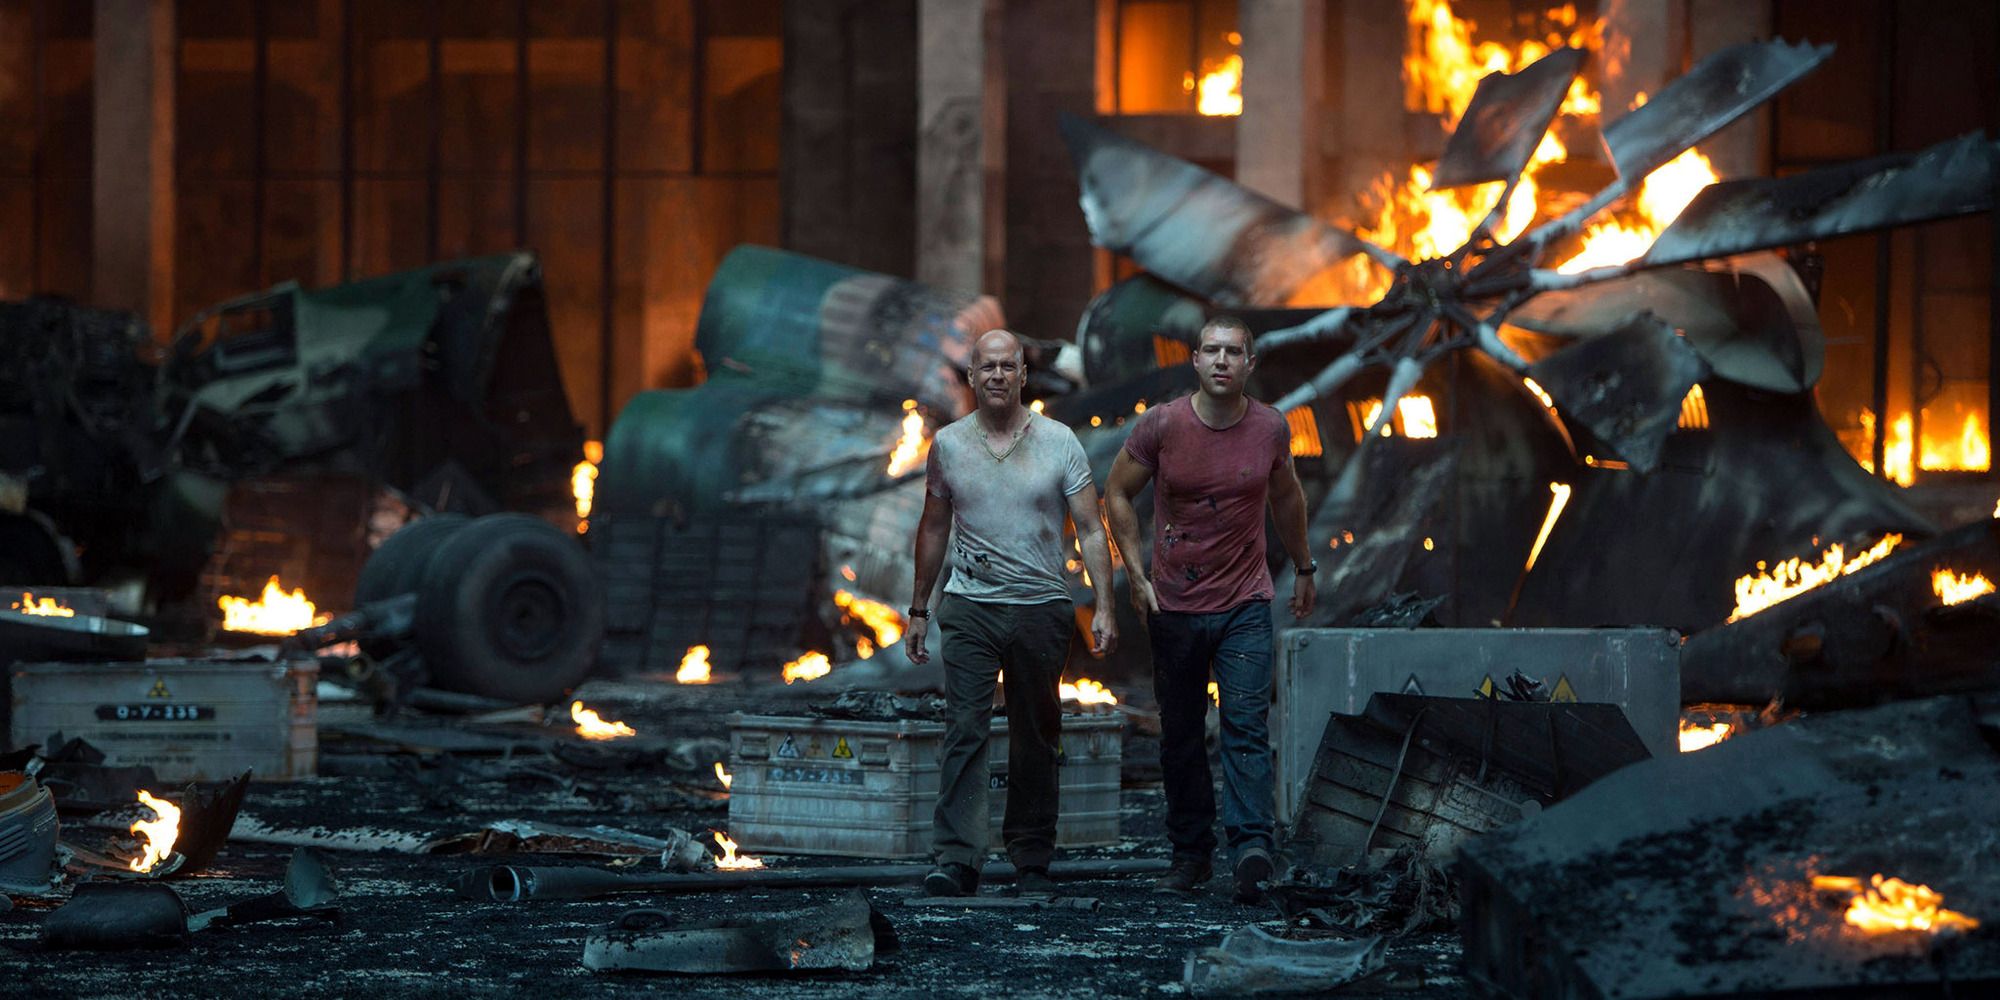 Bruce Willlis and Jai Courtney in 'A Good Day to Die Hard' walk away from the exploding helicopter